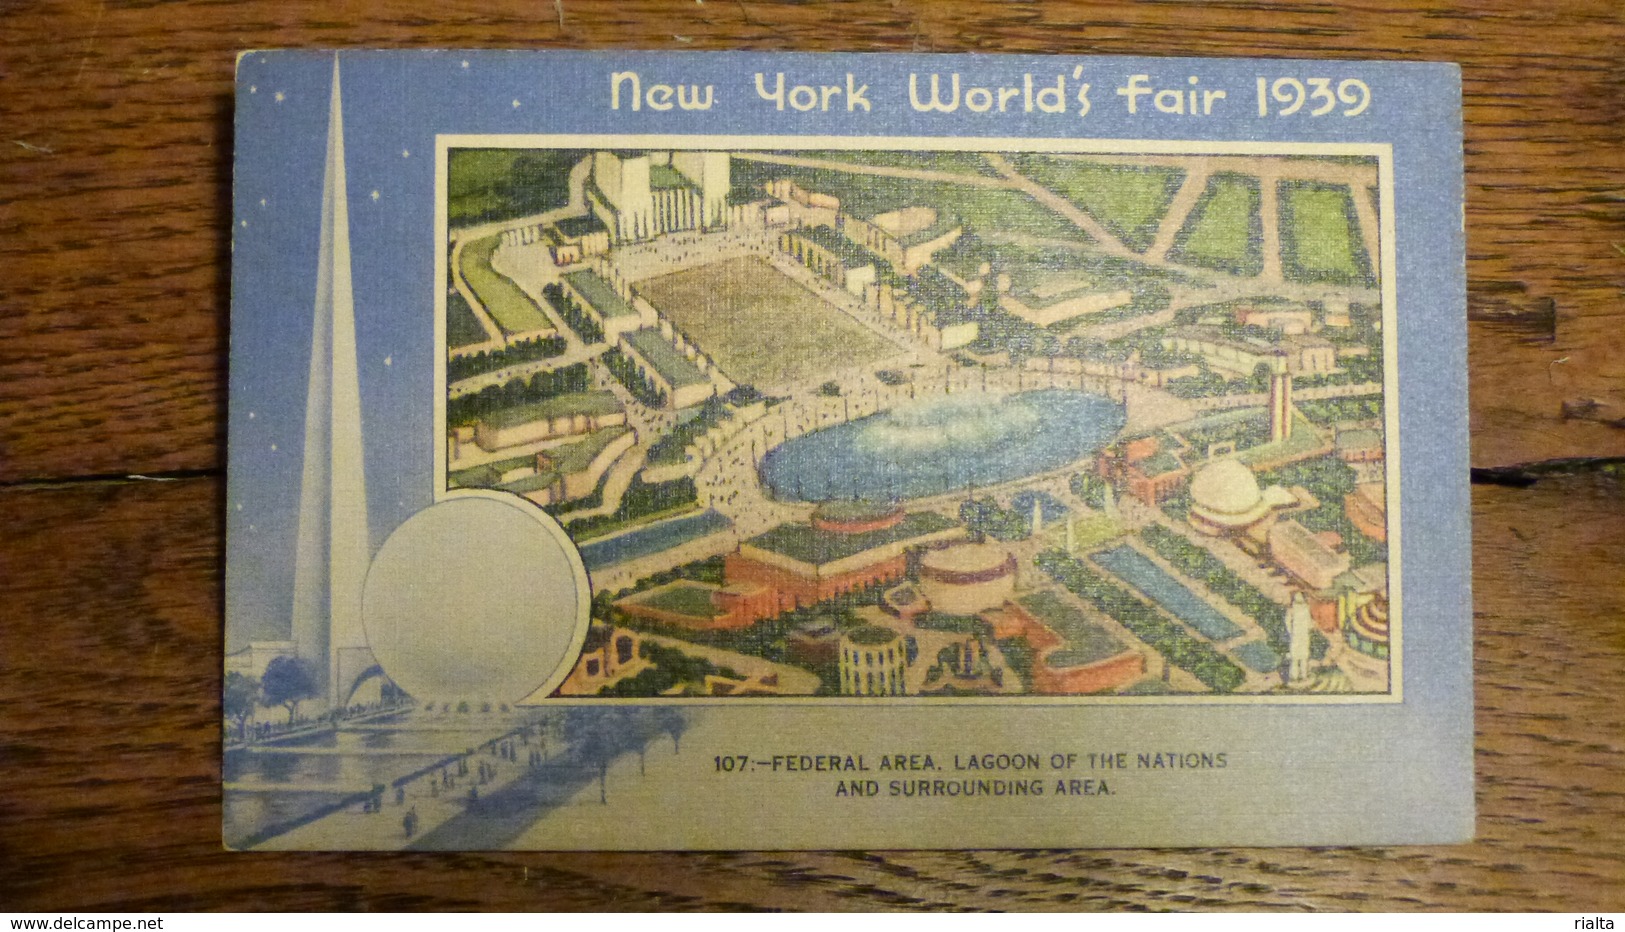 ETATS-UNIS, NEW YORK WORLD'S FAIR 1939, FEDERAL AREA, LAGOON OF THE NATIONS AND SURROUNDING AREA - Exhibitions